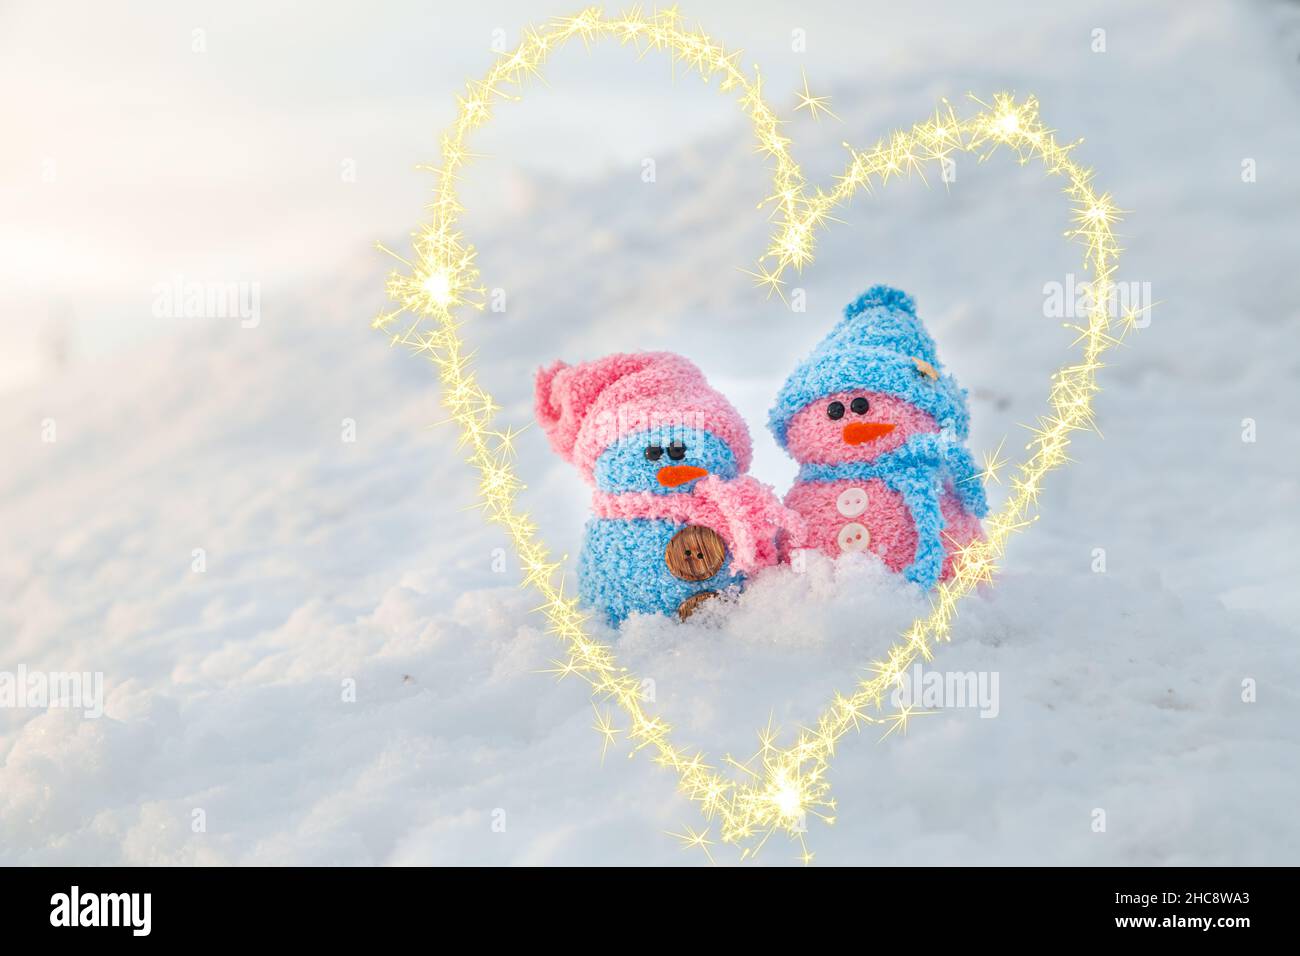 Cute homemade snowmen in a heart made of sparklers. Valentine's day card. Winter background. Stock Photo